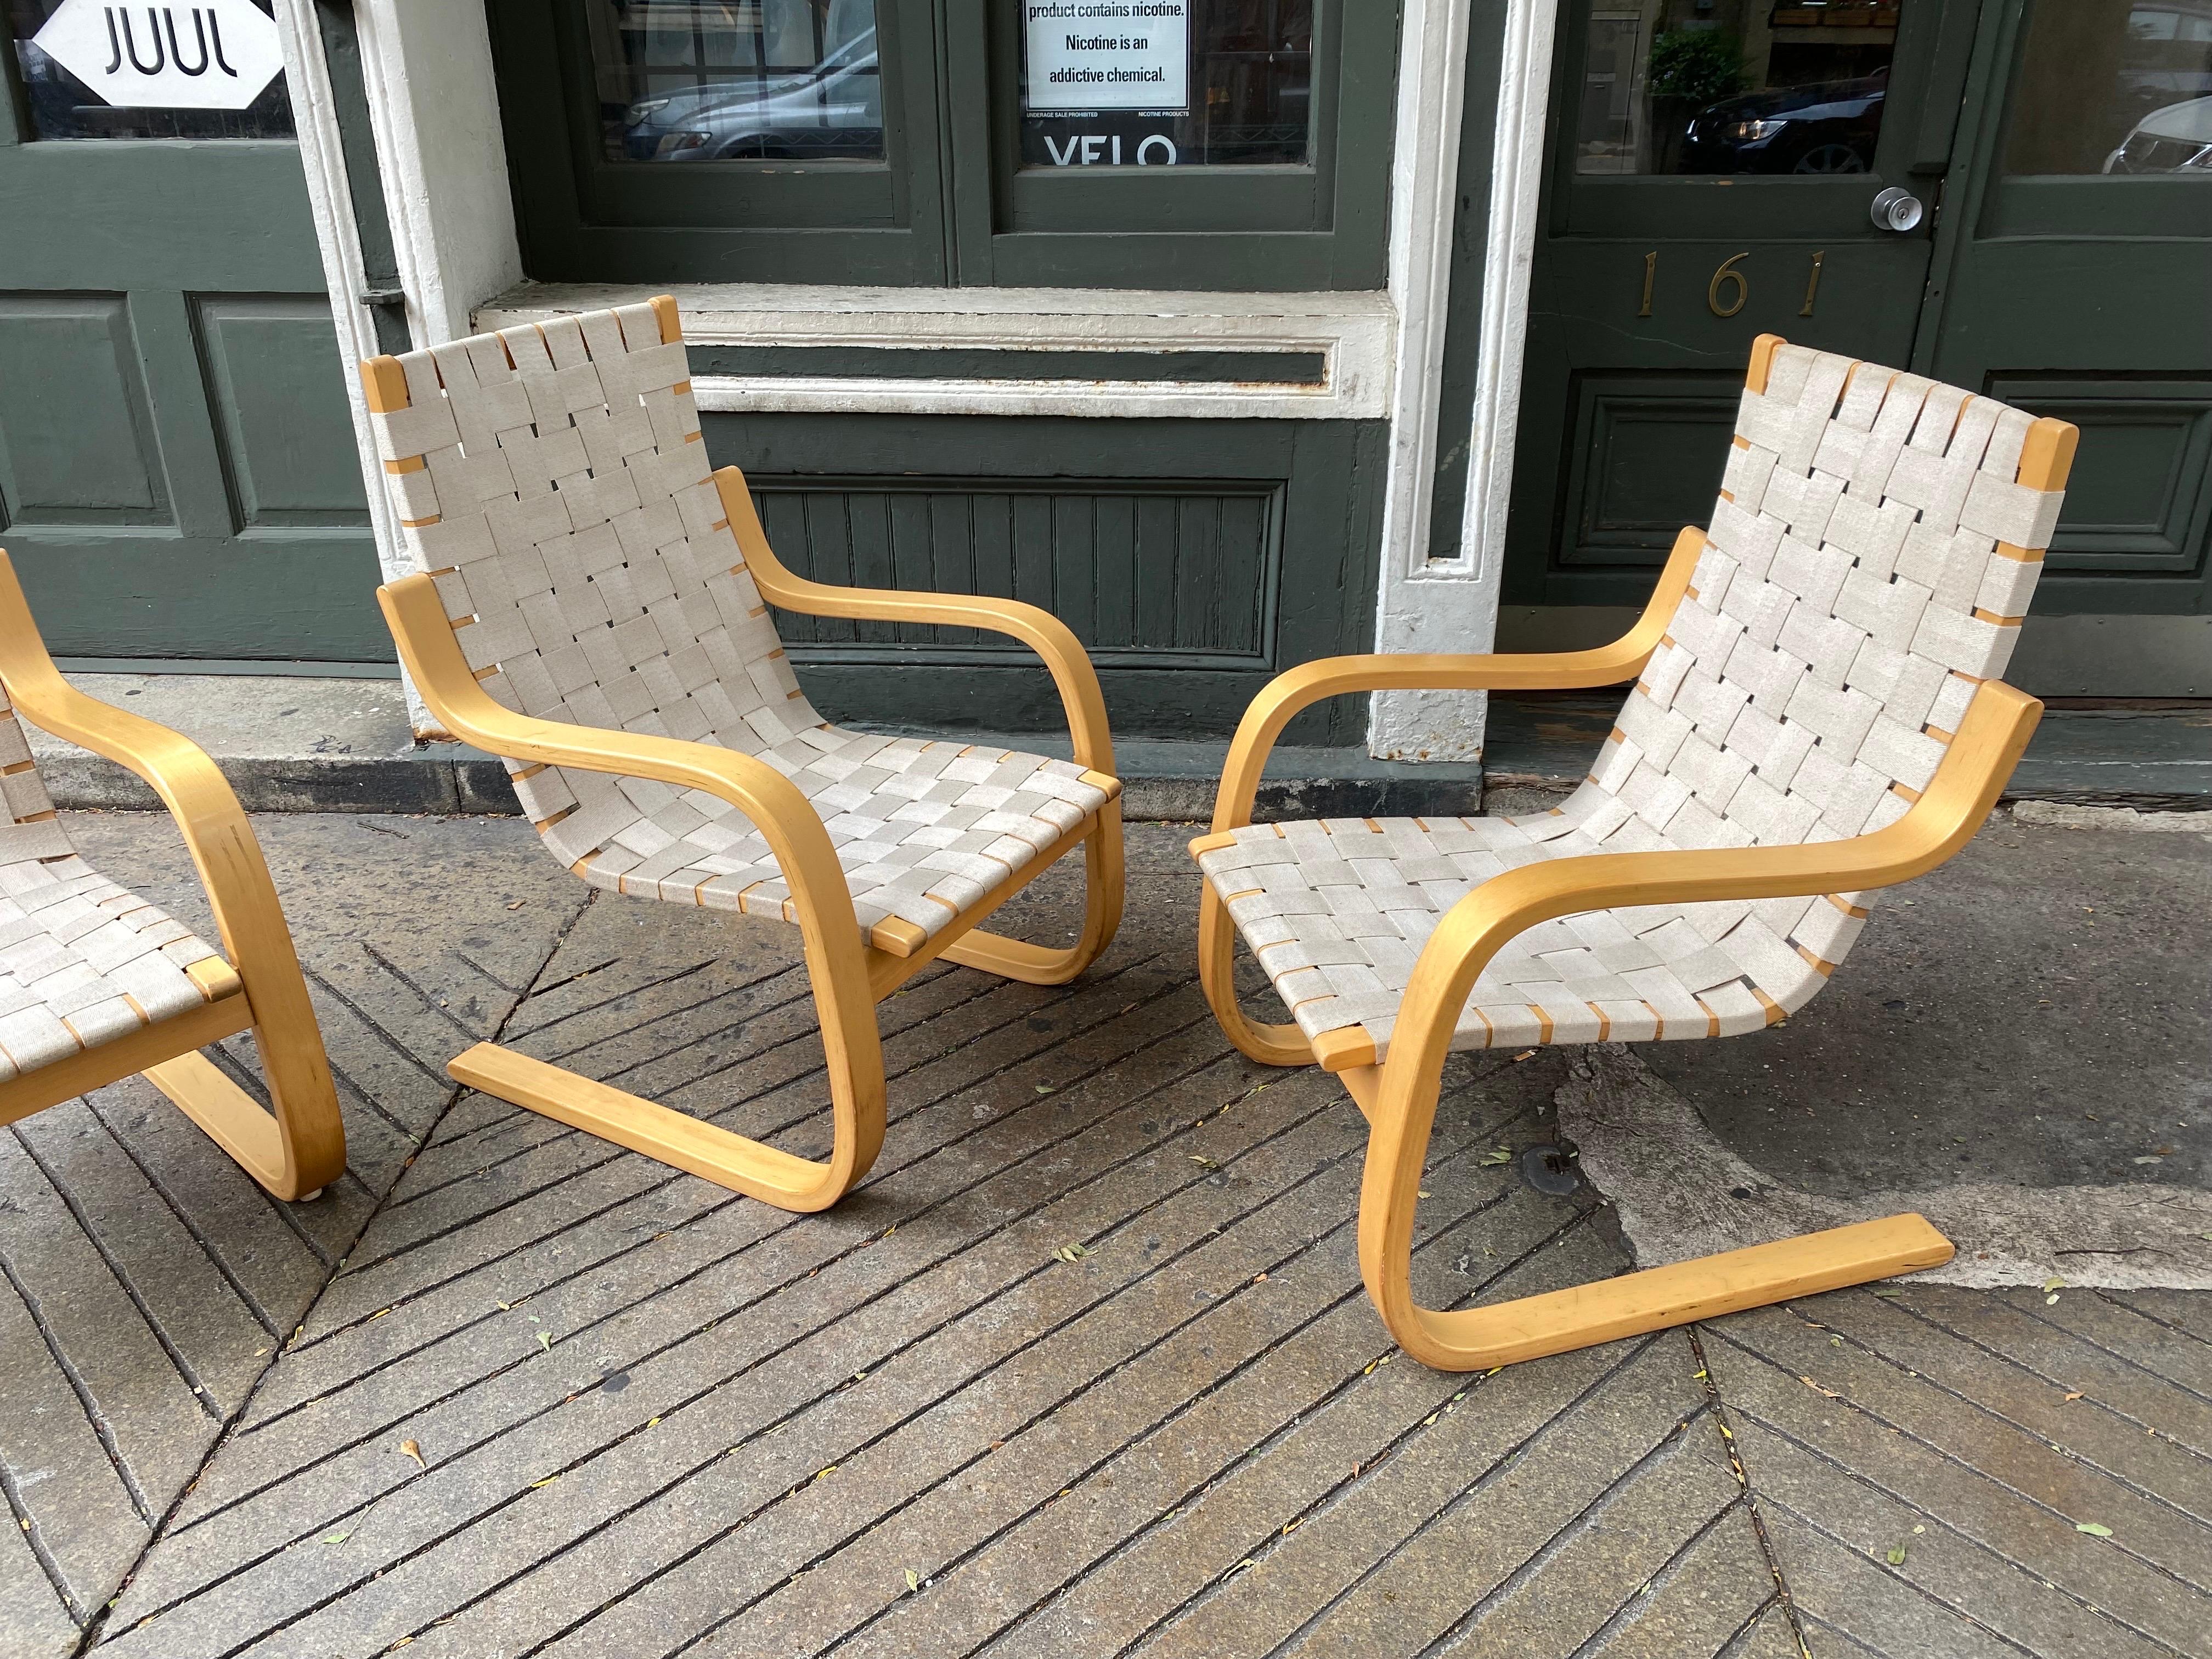 Alvar Aalto lounge Chairs, model 406. 2  Chairs  Available.  Chairs were at a Beach House so not heavily used.  Wood is very nice and straps show minimal wear.  Table available in a separate listing.  ICF label to underside.